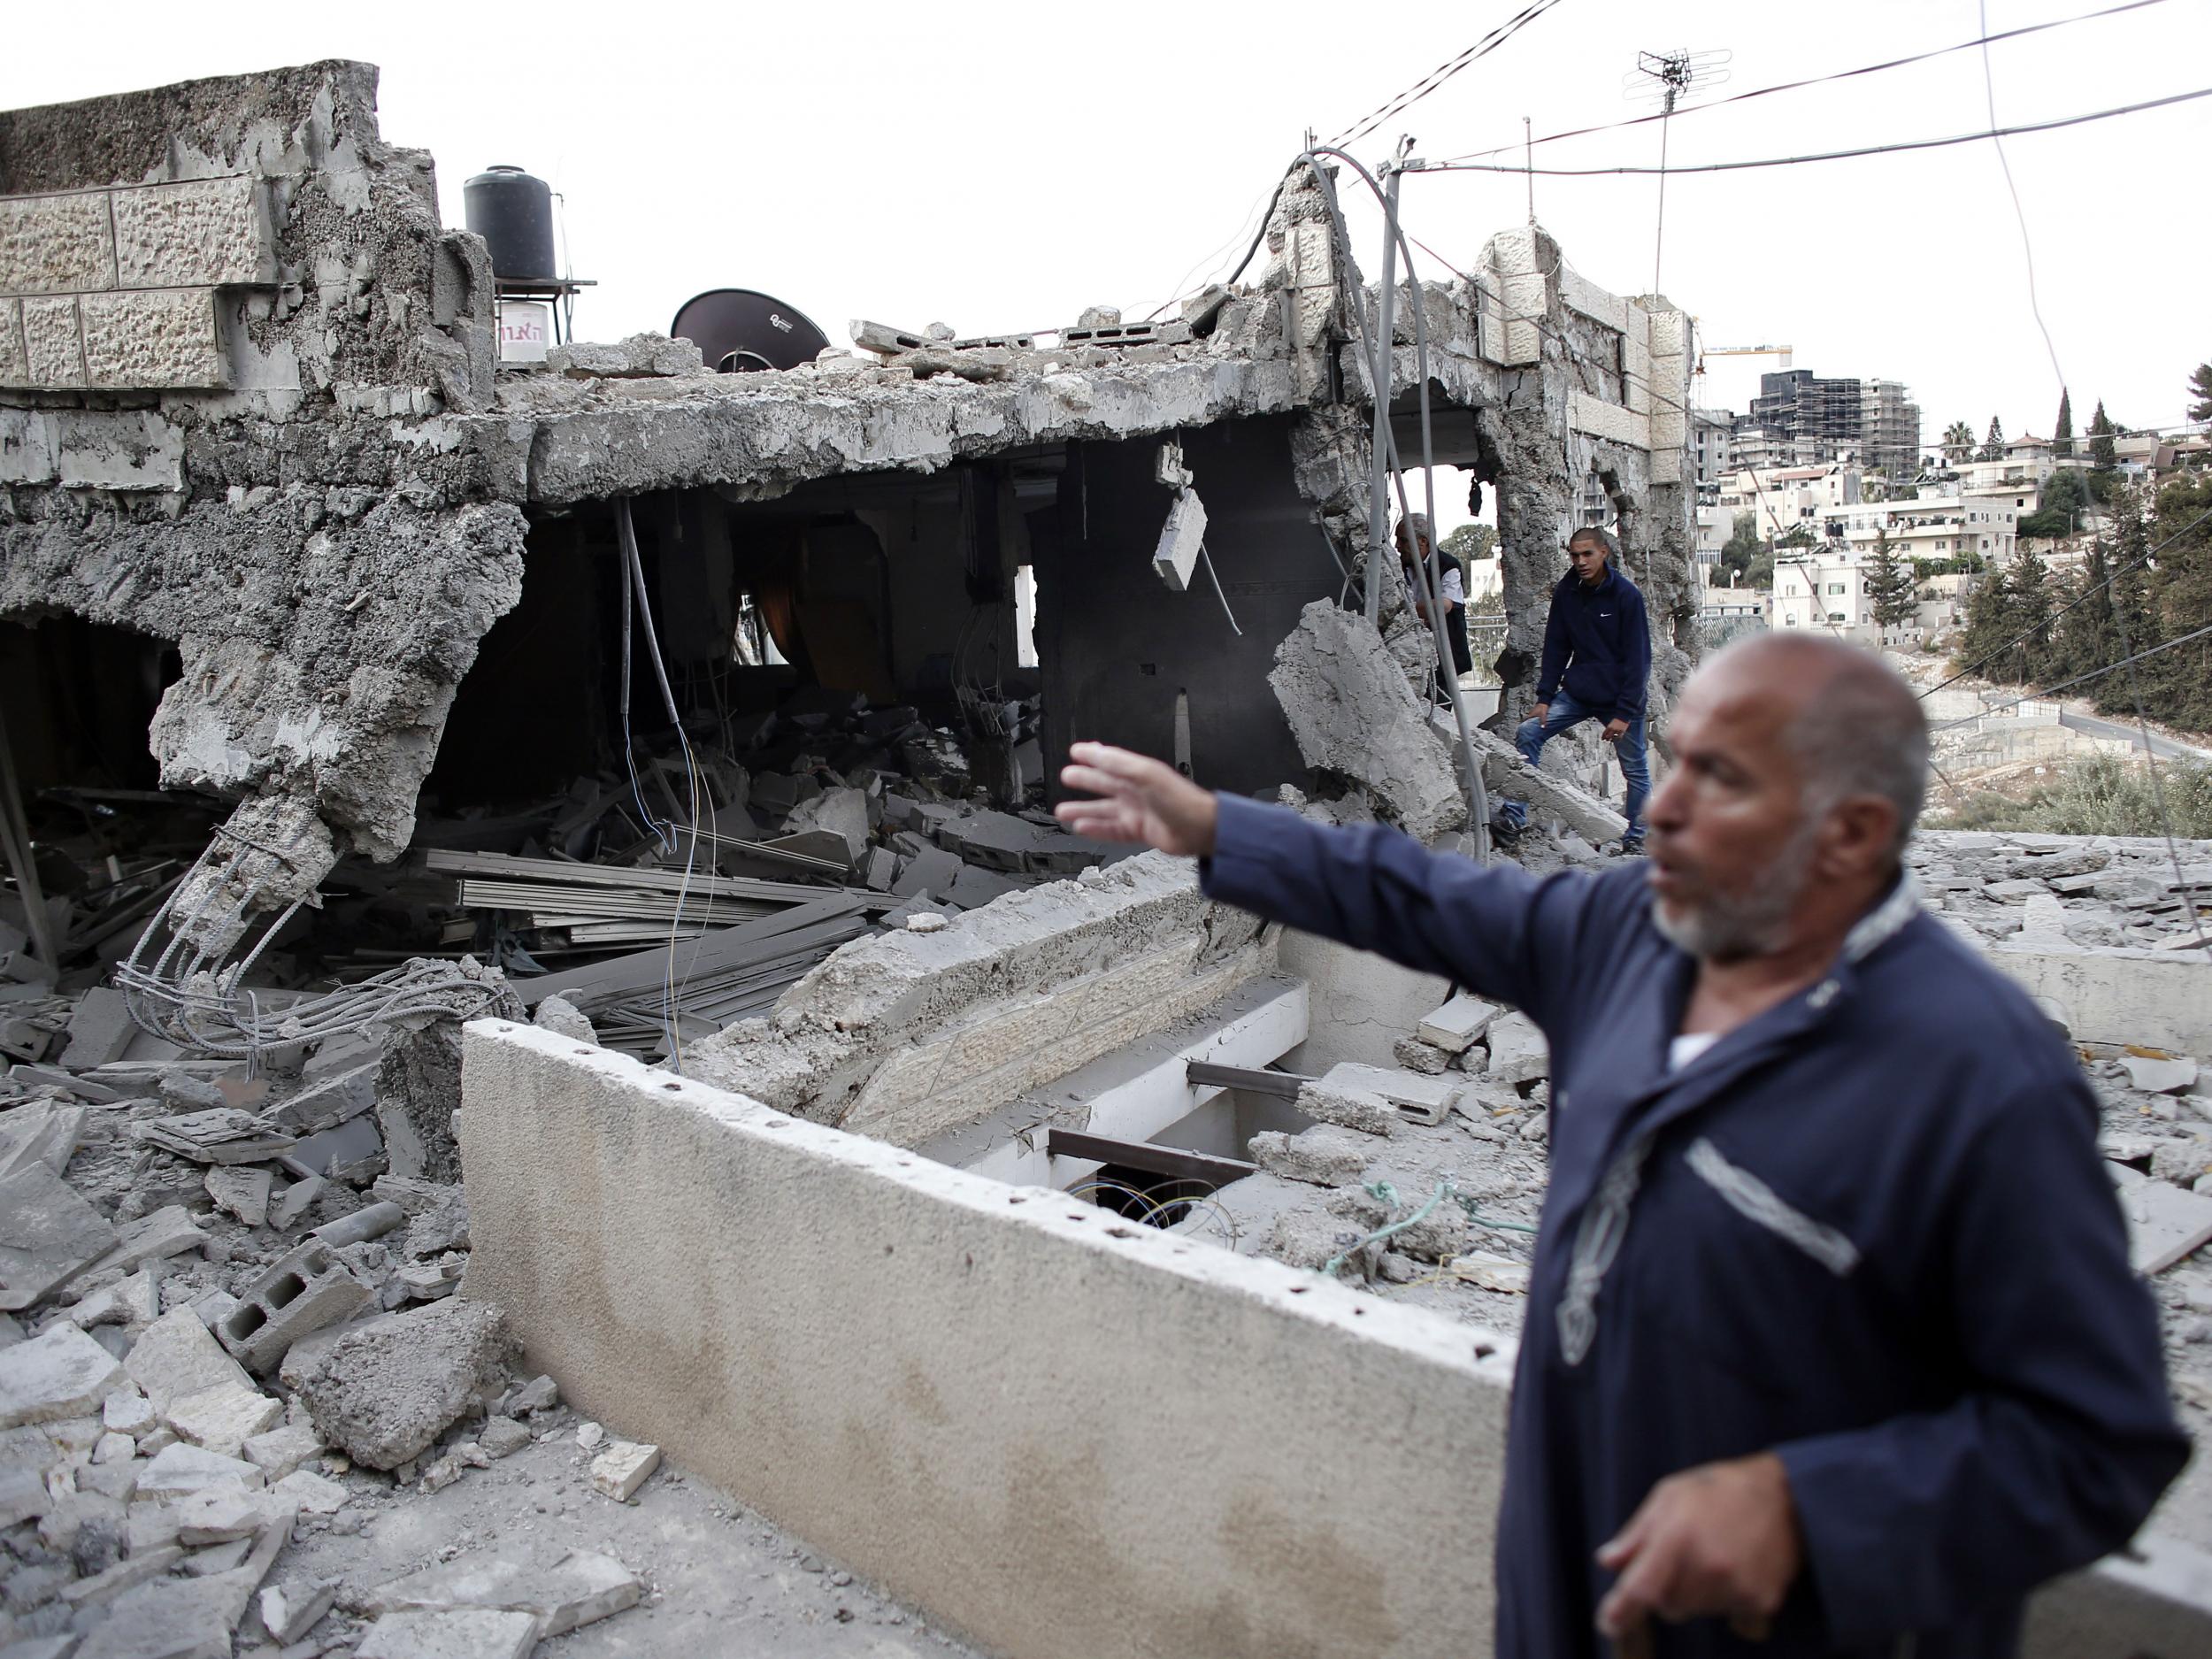 A Palestinian man shows the rubble of a destroyed house after Israeli security forces demolished the homes of two Palestinians behind attacks in the Palestinian neighborhood of Jabal Mukaber in east Jerusalem, on October 6, 2015